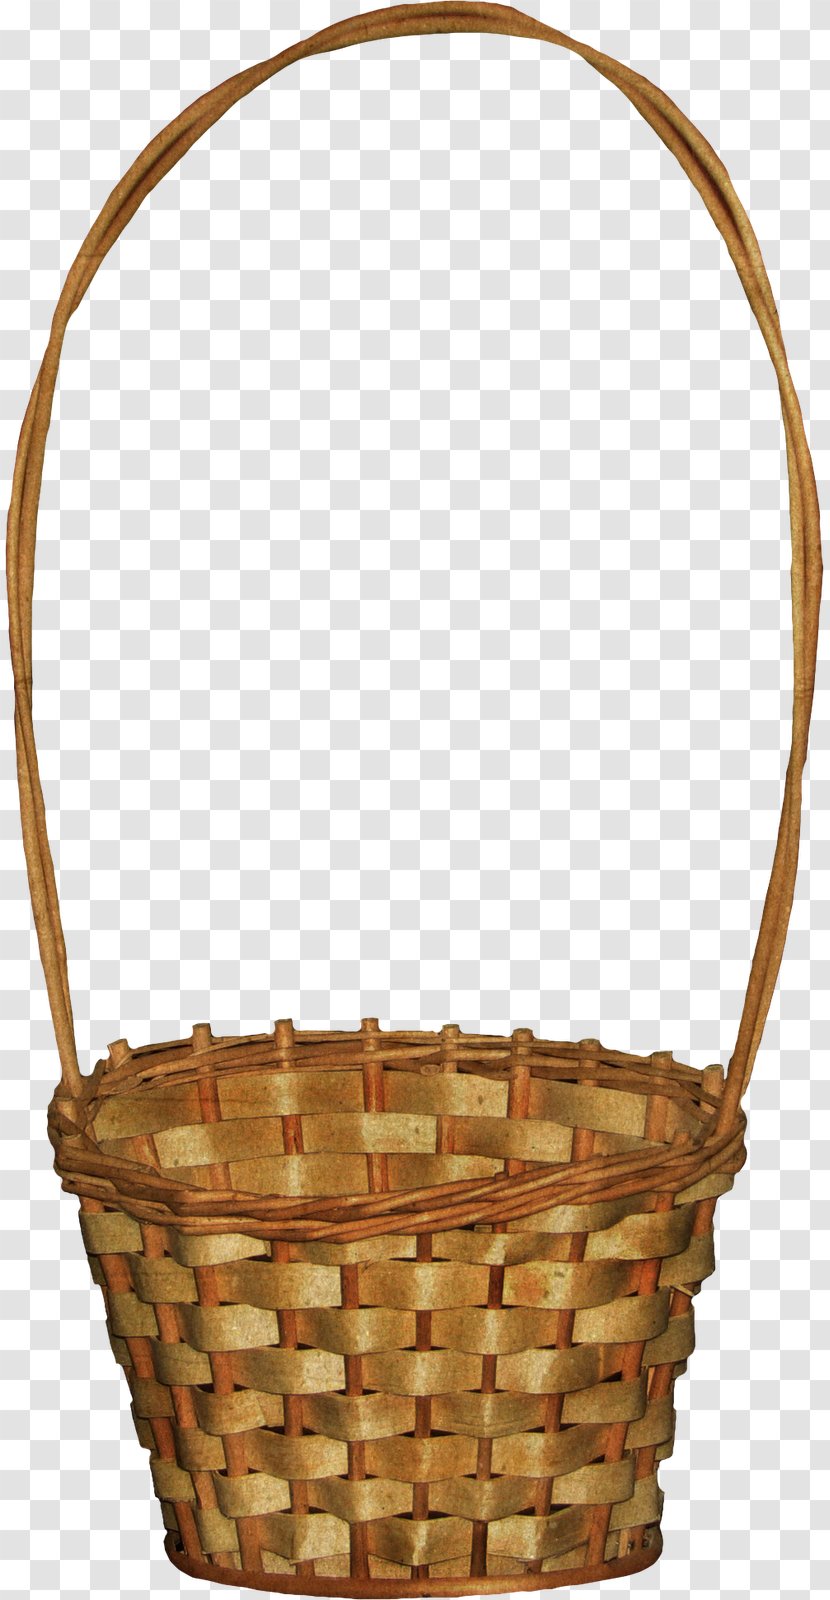 NYSE:GLW Wicker Basket Clothing Accessories - Oo Transparent PNG